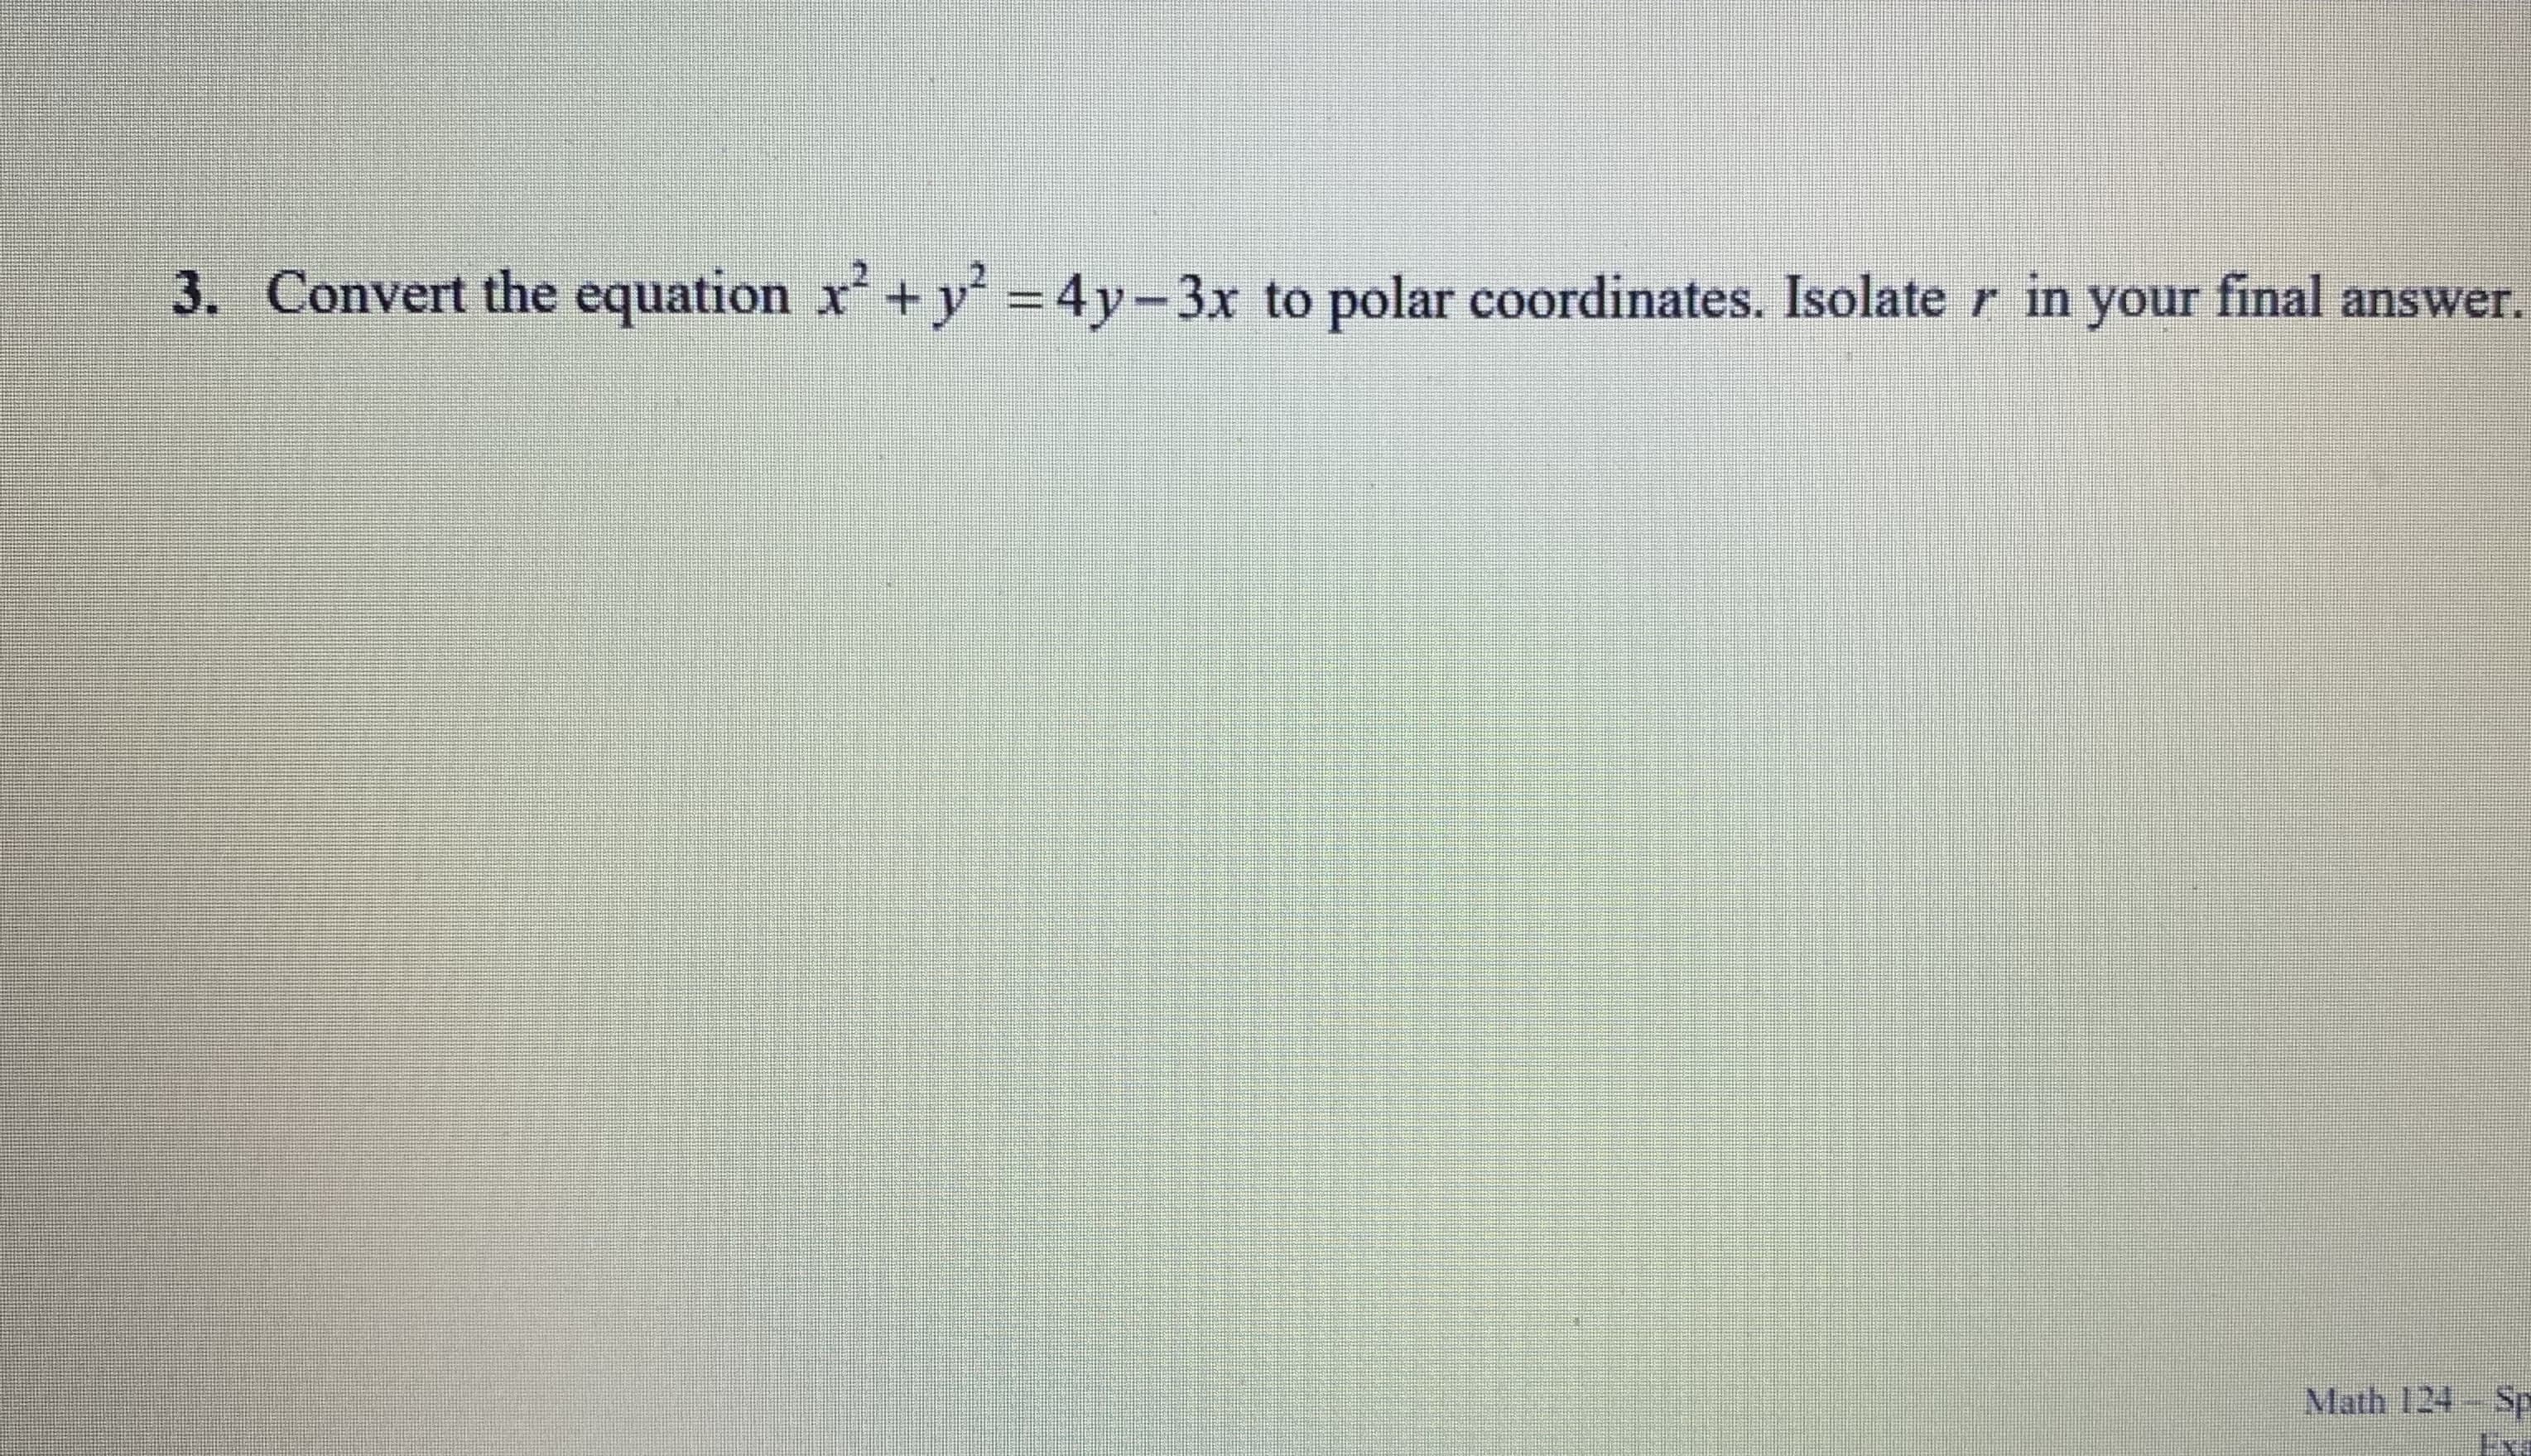 Convert the equation x' + y' =4y-3x to polar coordinates. Isolate
r in your final answer.
